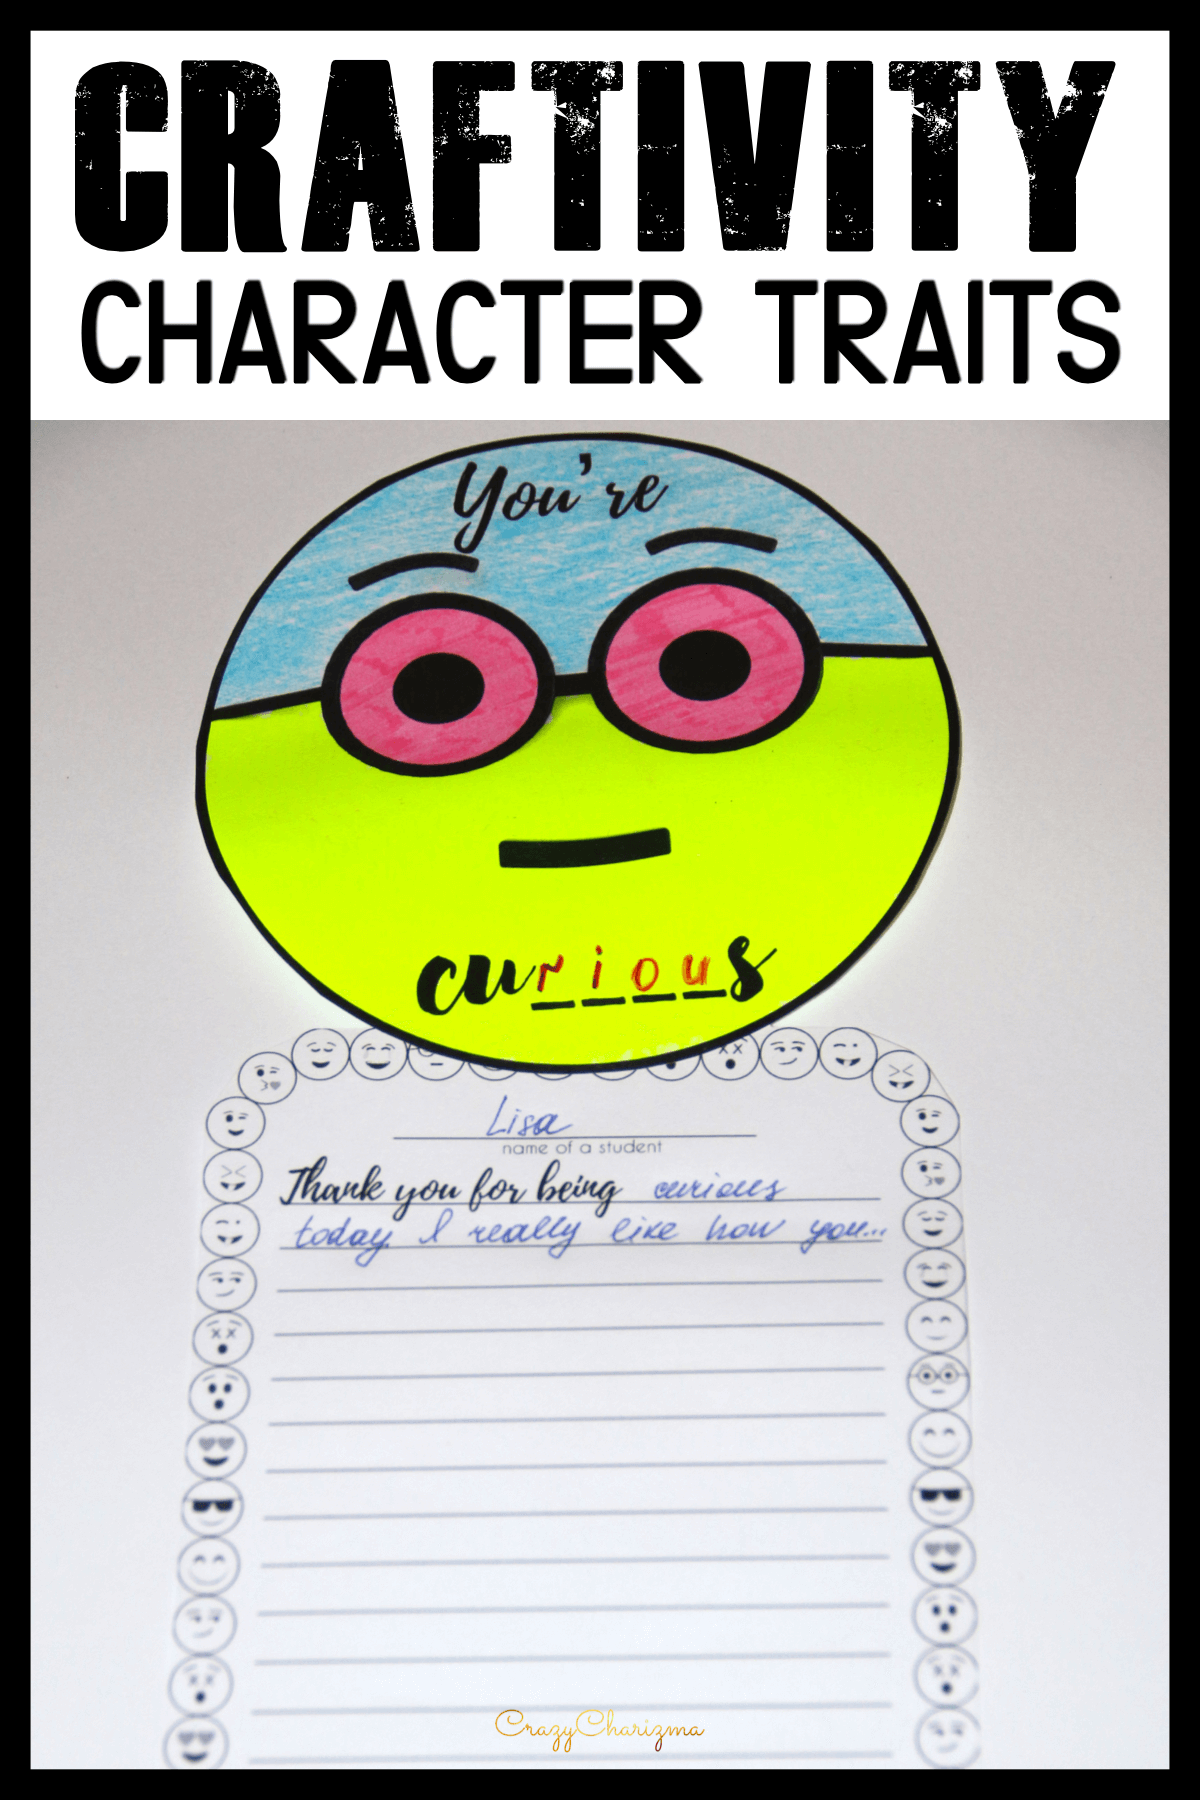 Teach positive character traits with these activities which include emojis craftivity. The main idea is to characterize classmates (compliments activity) and practice writing. Build kindness and rapport in your classroom!